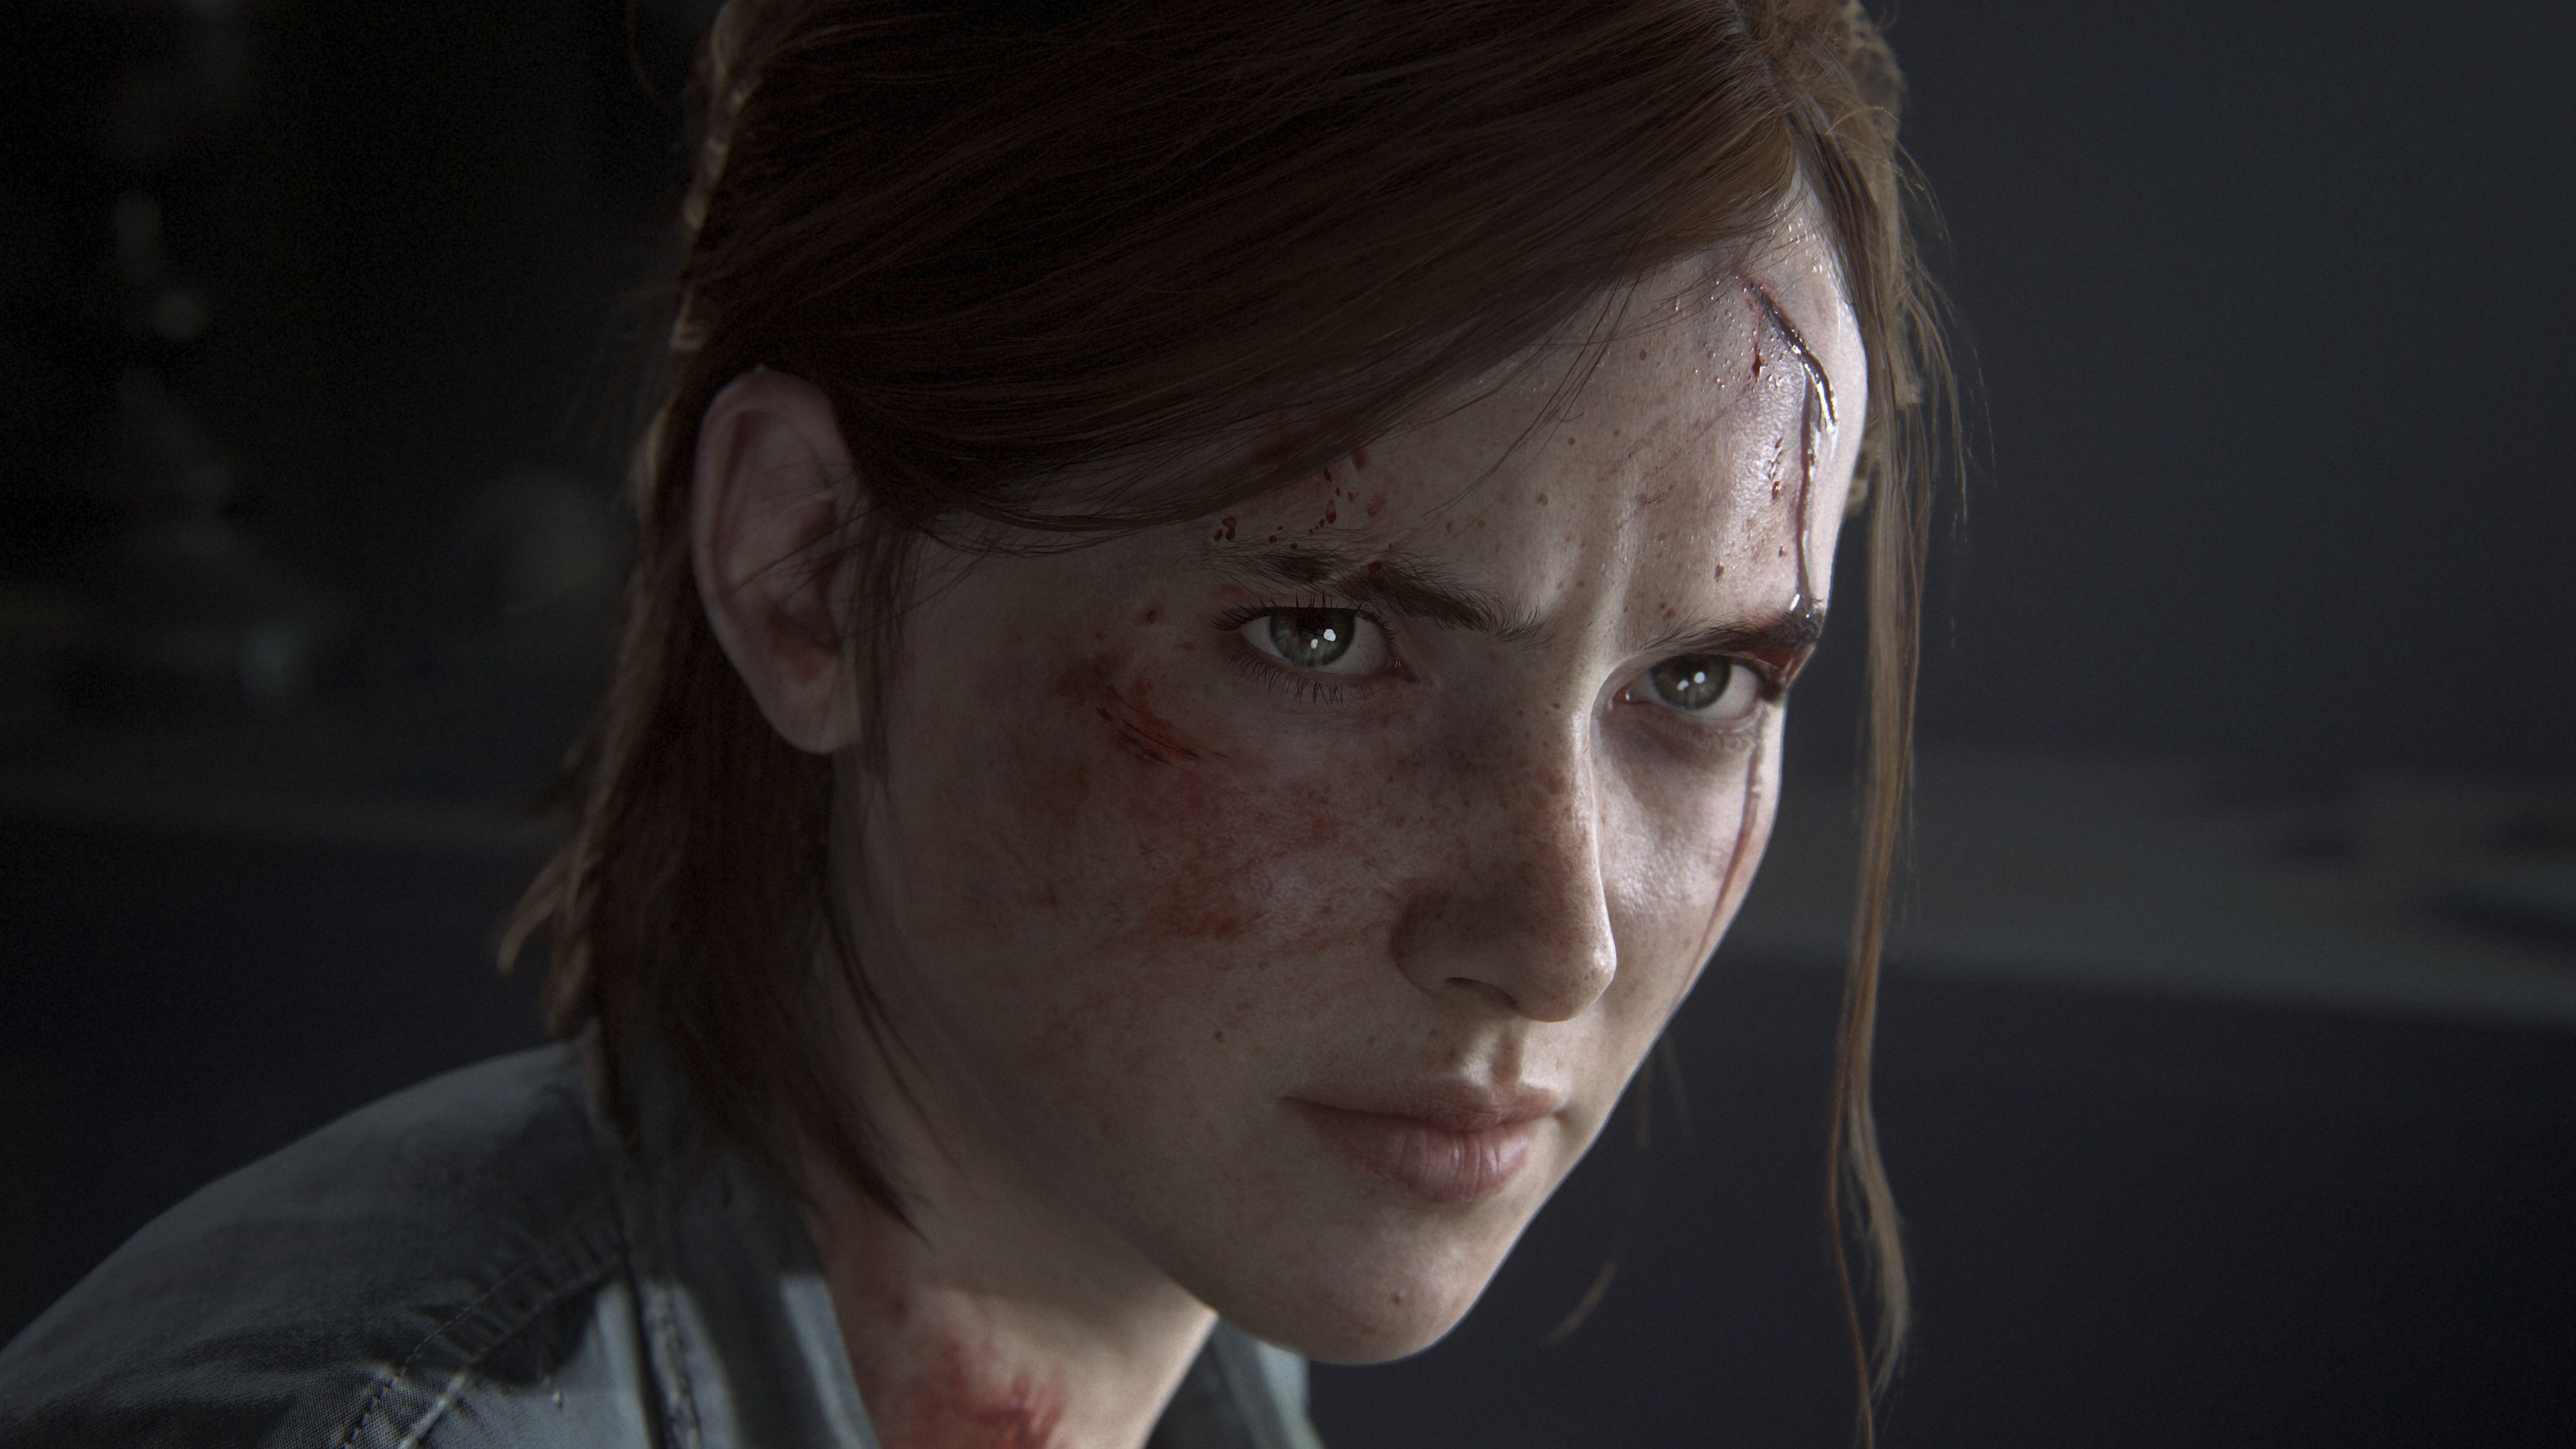 The Last of Us Part 2 Remastered is coming to PlayStation 5 in January